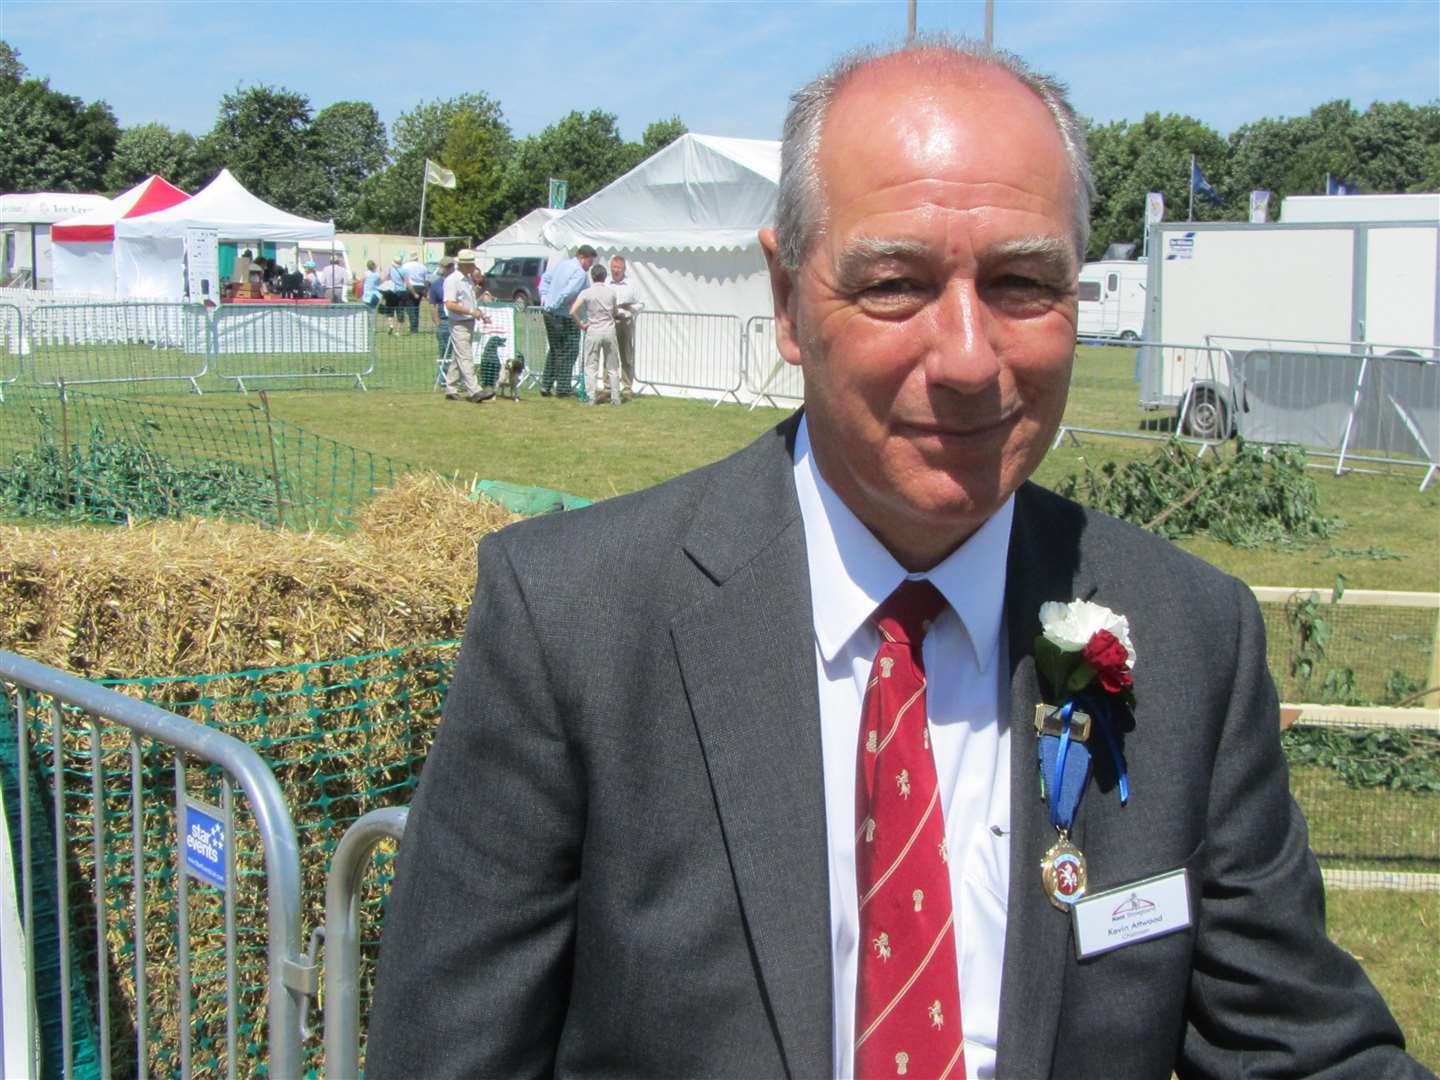 Kent County Agricultural Society chairman Kevin Attwood is looking forward to the event